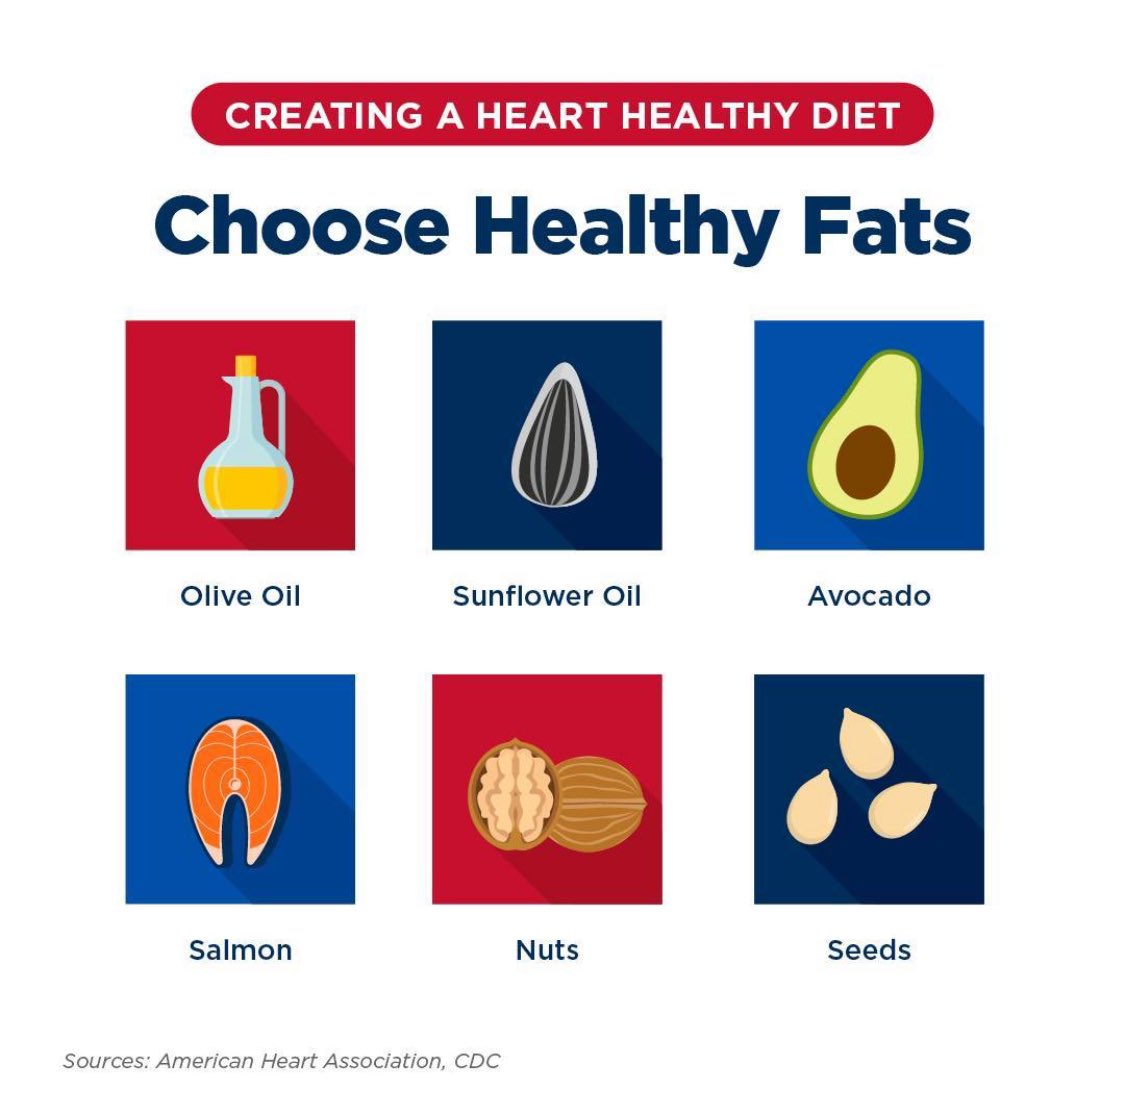 Roughly 75% of U.S. adults negatively impact their heart health with poor food choices. Learn about how you can create a heart-healthy diet and lower your risk of heart disease. ow.ly/PNrT30rpzlQ #hearthealth